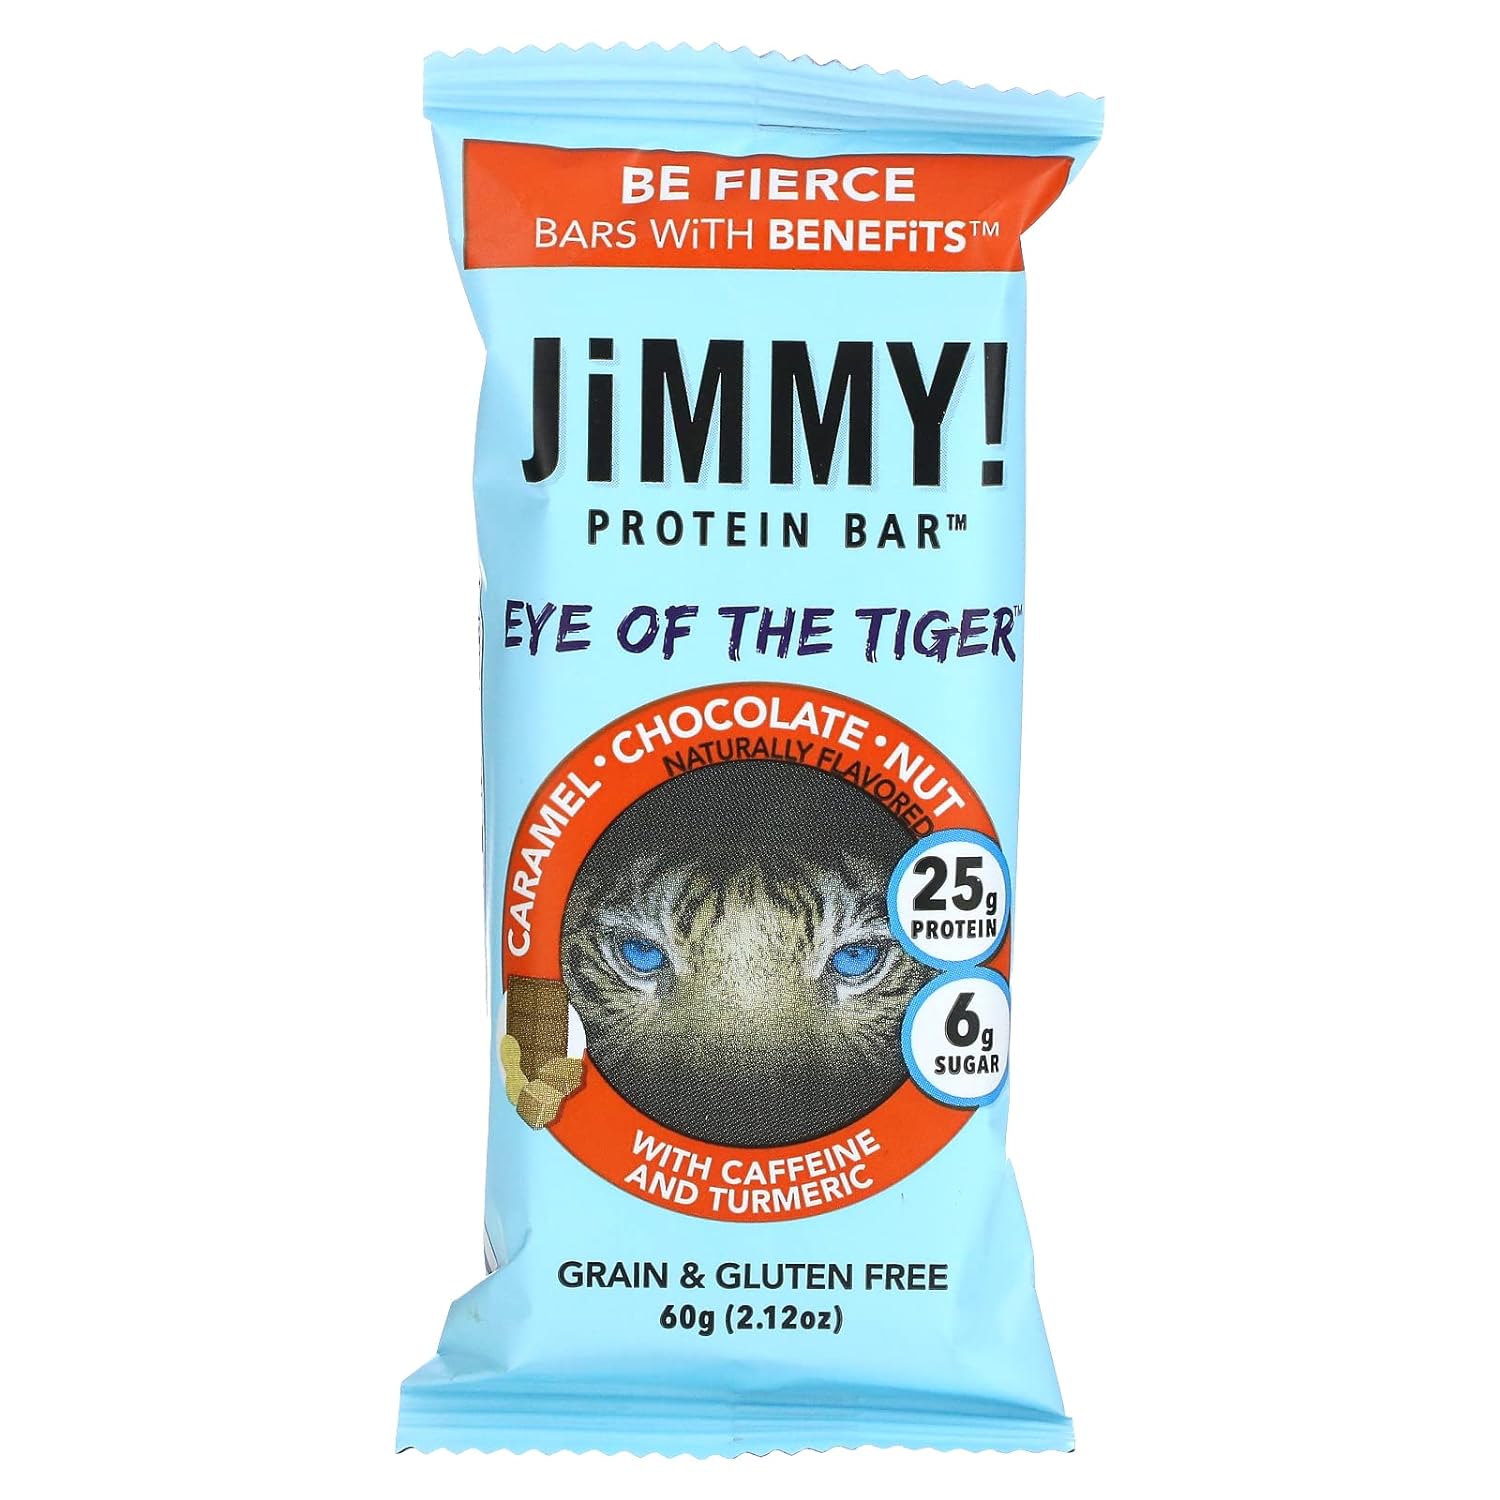 JiMMY! Protein Bar, Caramel Chocolate Nut, Eye of the Tiger, 12 Count 